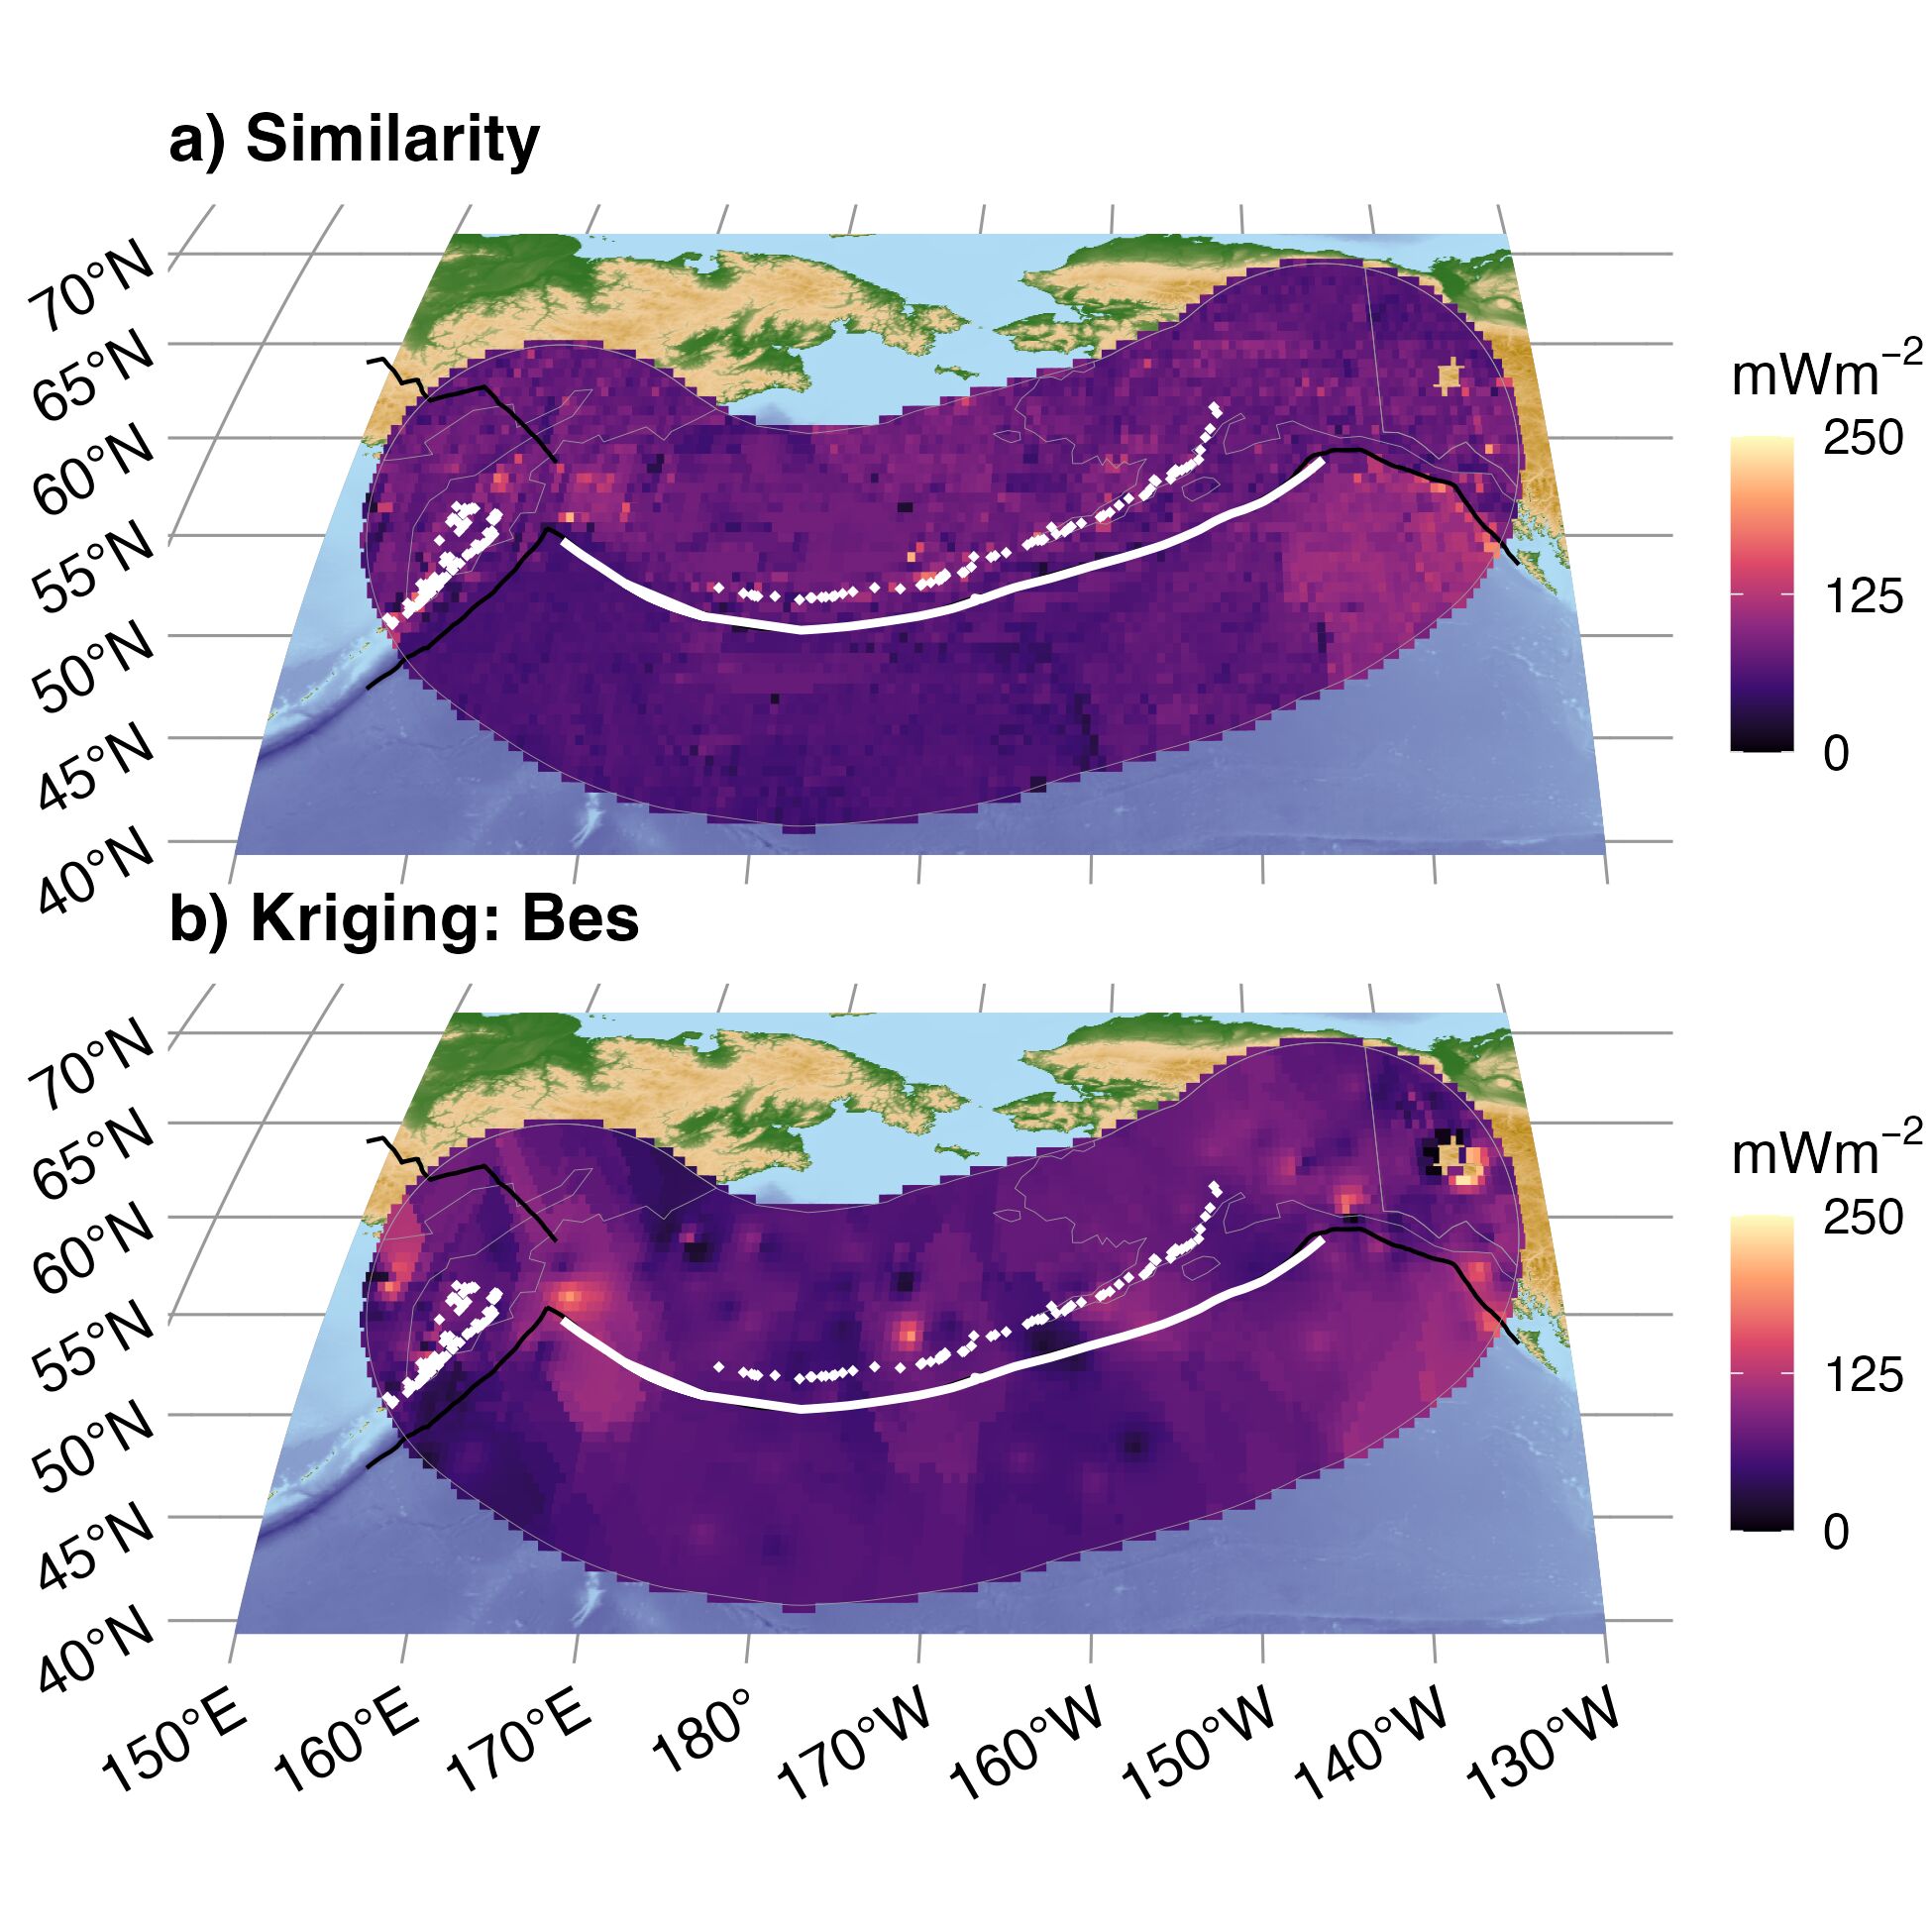 Similarity (a) and Kriging (b) interpolations for Alaska Aleutians. Refer to the main text for explanation of panels and colors.